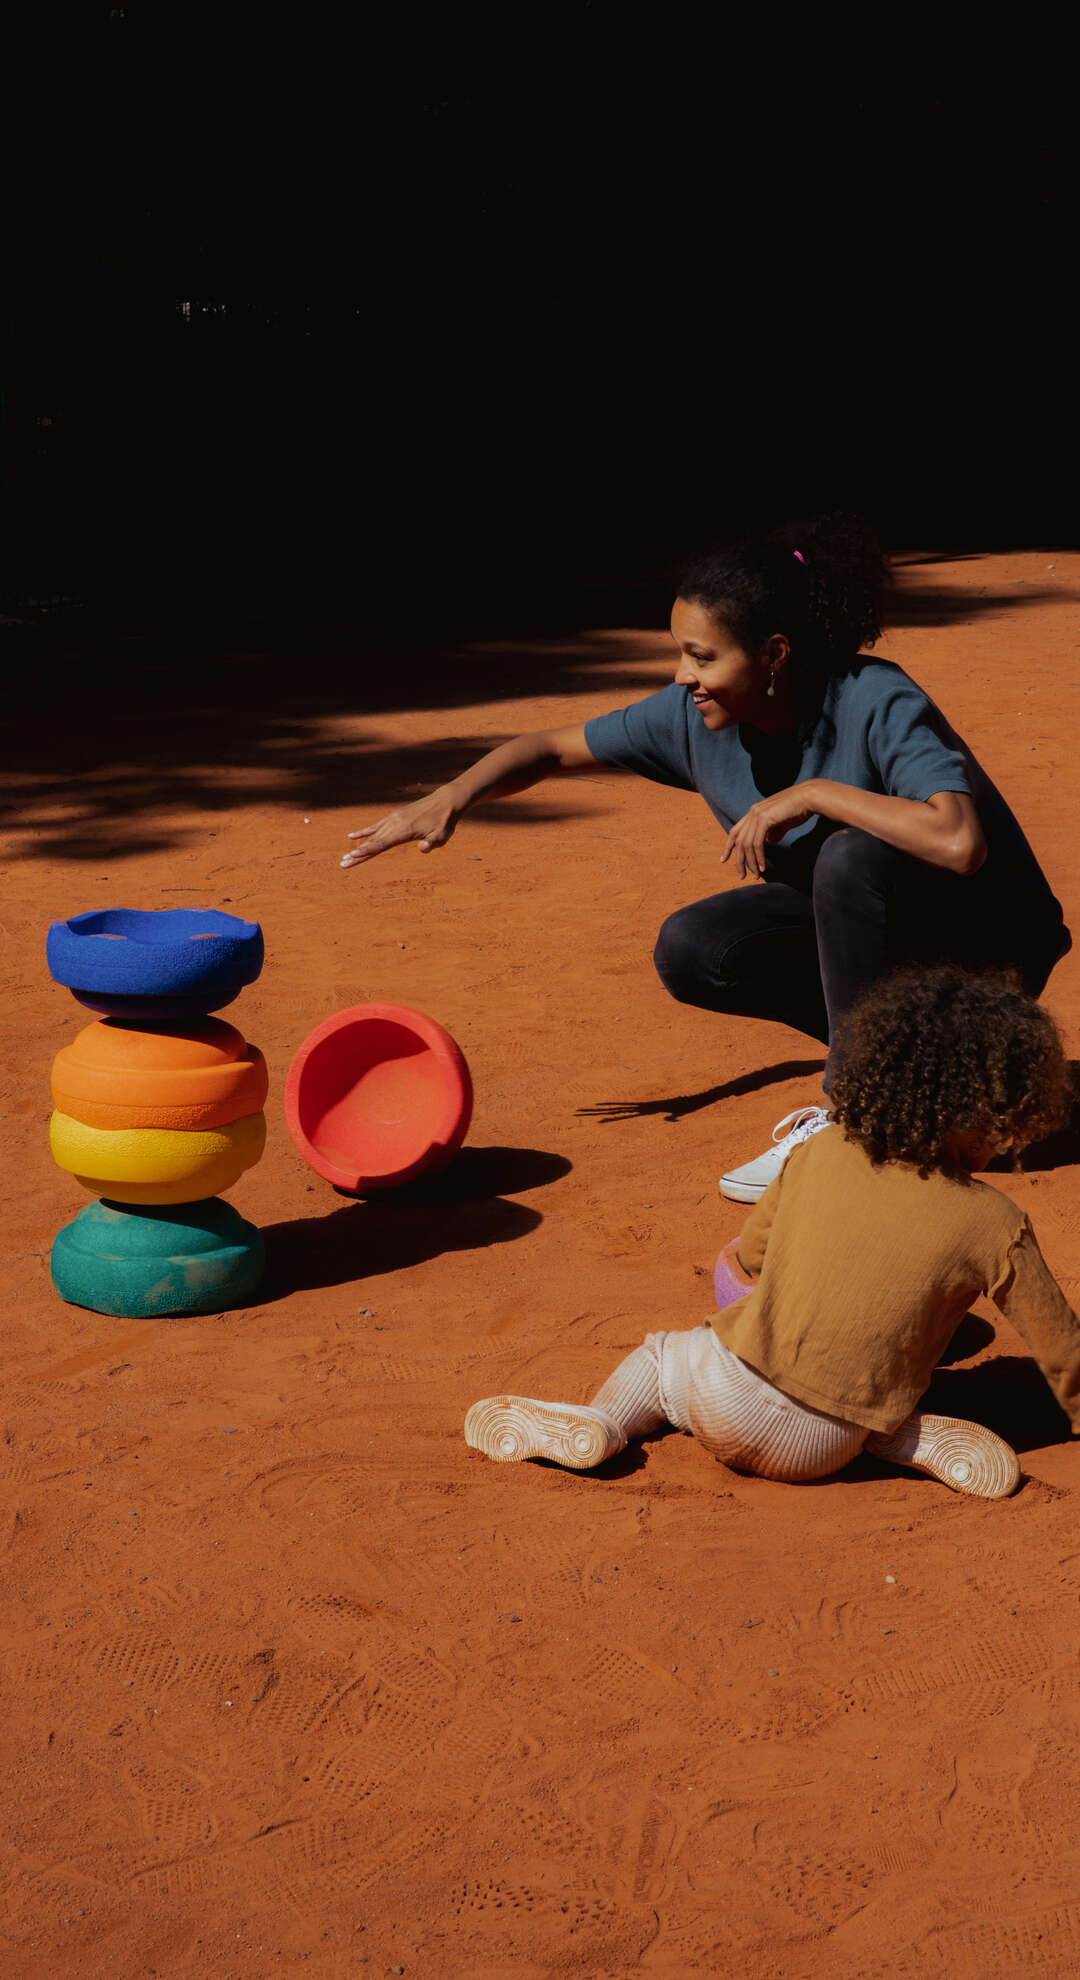 Women and child are playing with Original rainbow classic